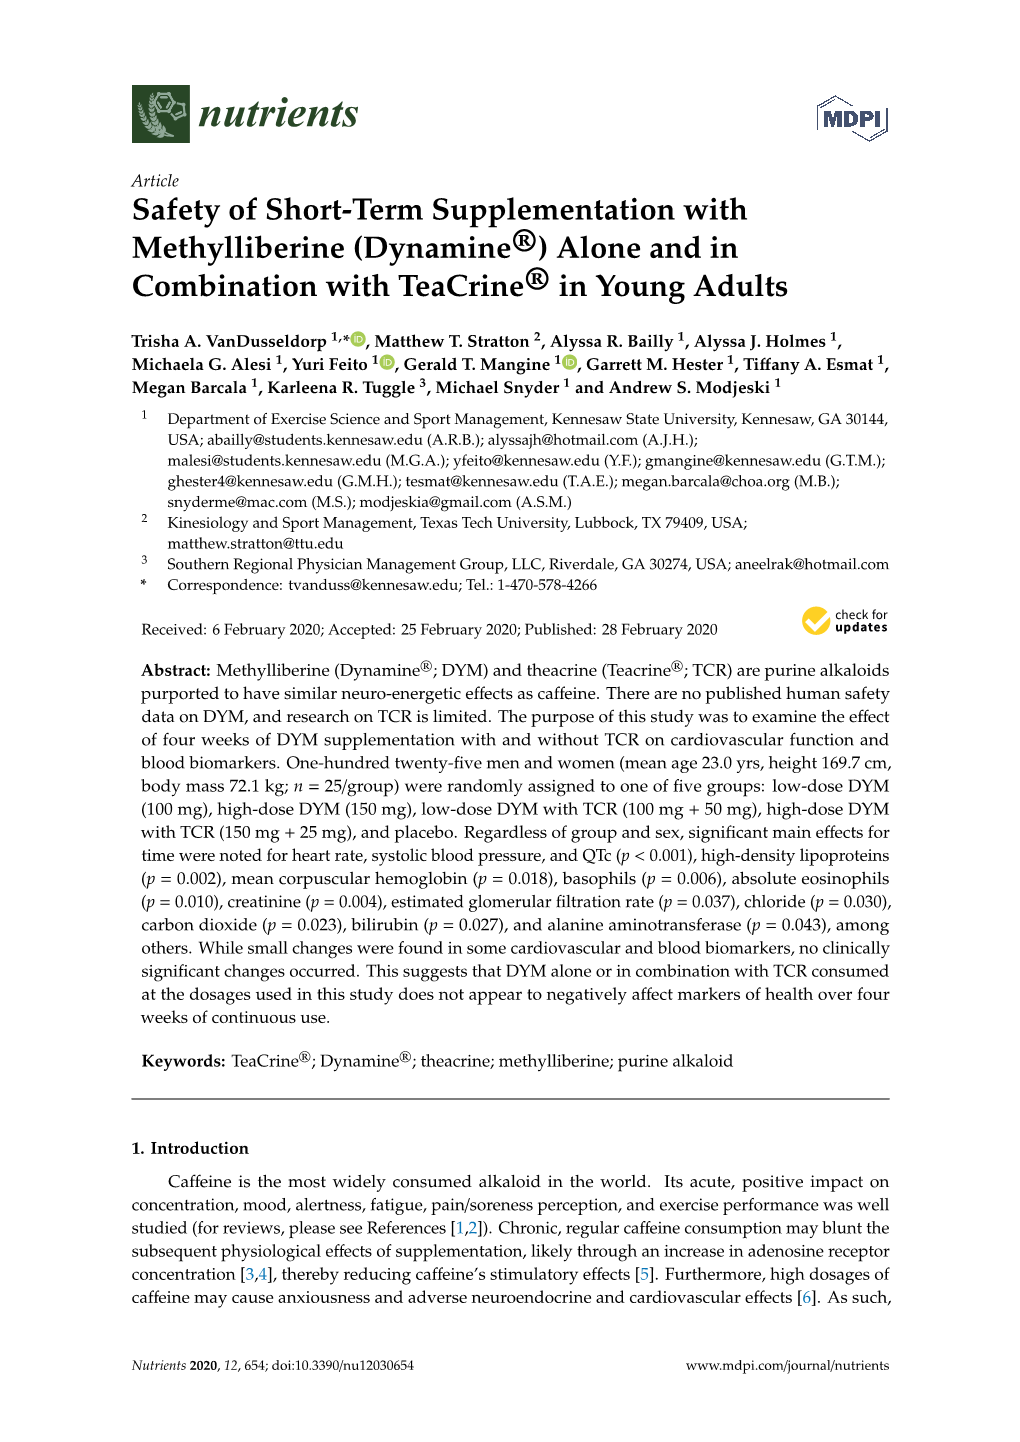 Safety of Short-Term Supplementation with Methylliberine (Dynamine®) Alone and in Combination with Teacrine® in Young Adults